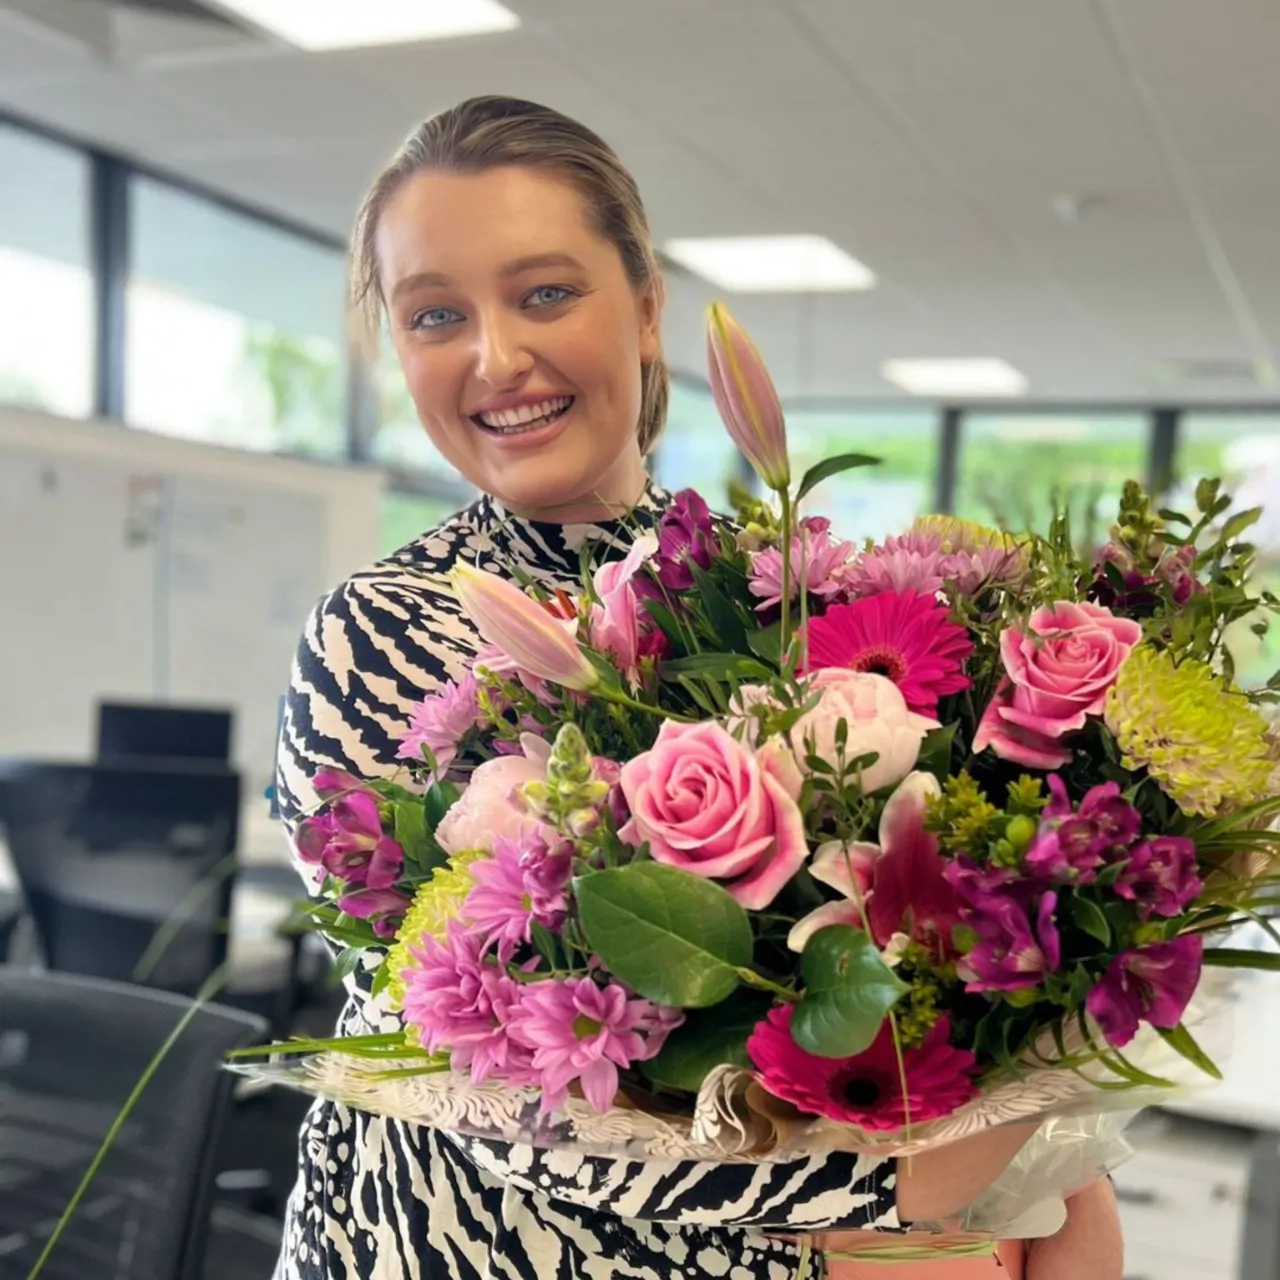 Hannah Hemsley, Head of People at Quad, gifted flowers